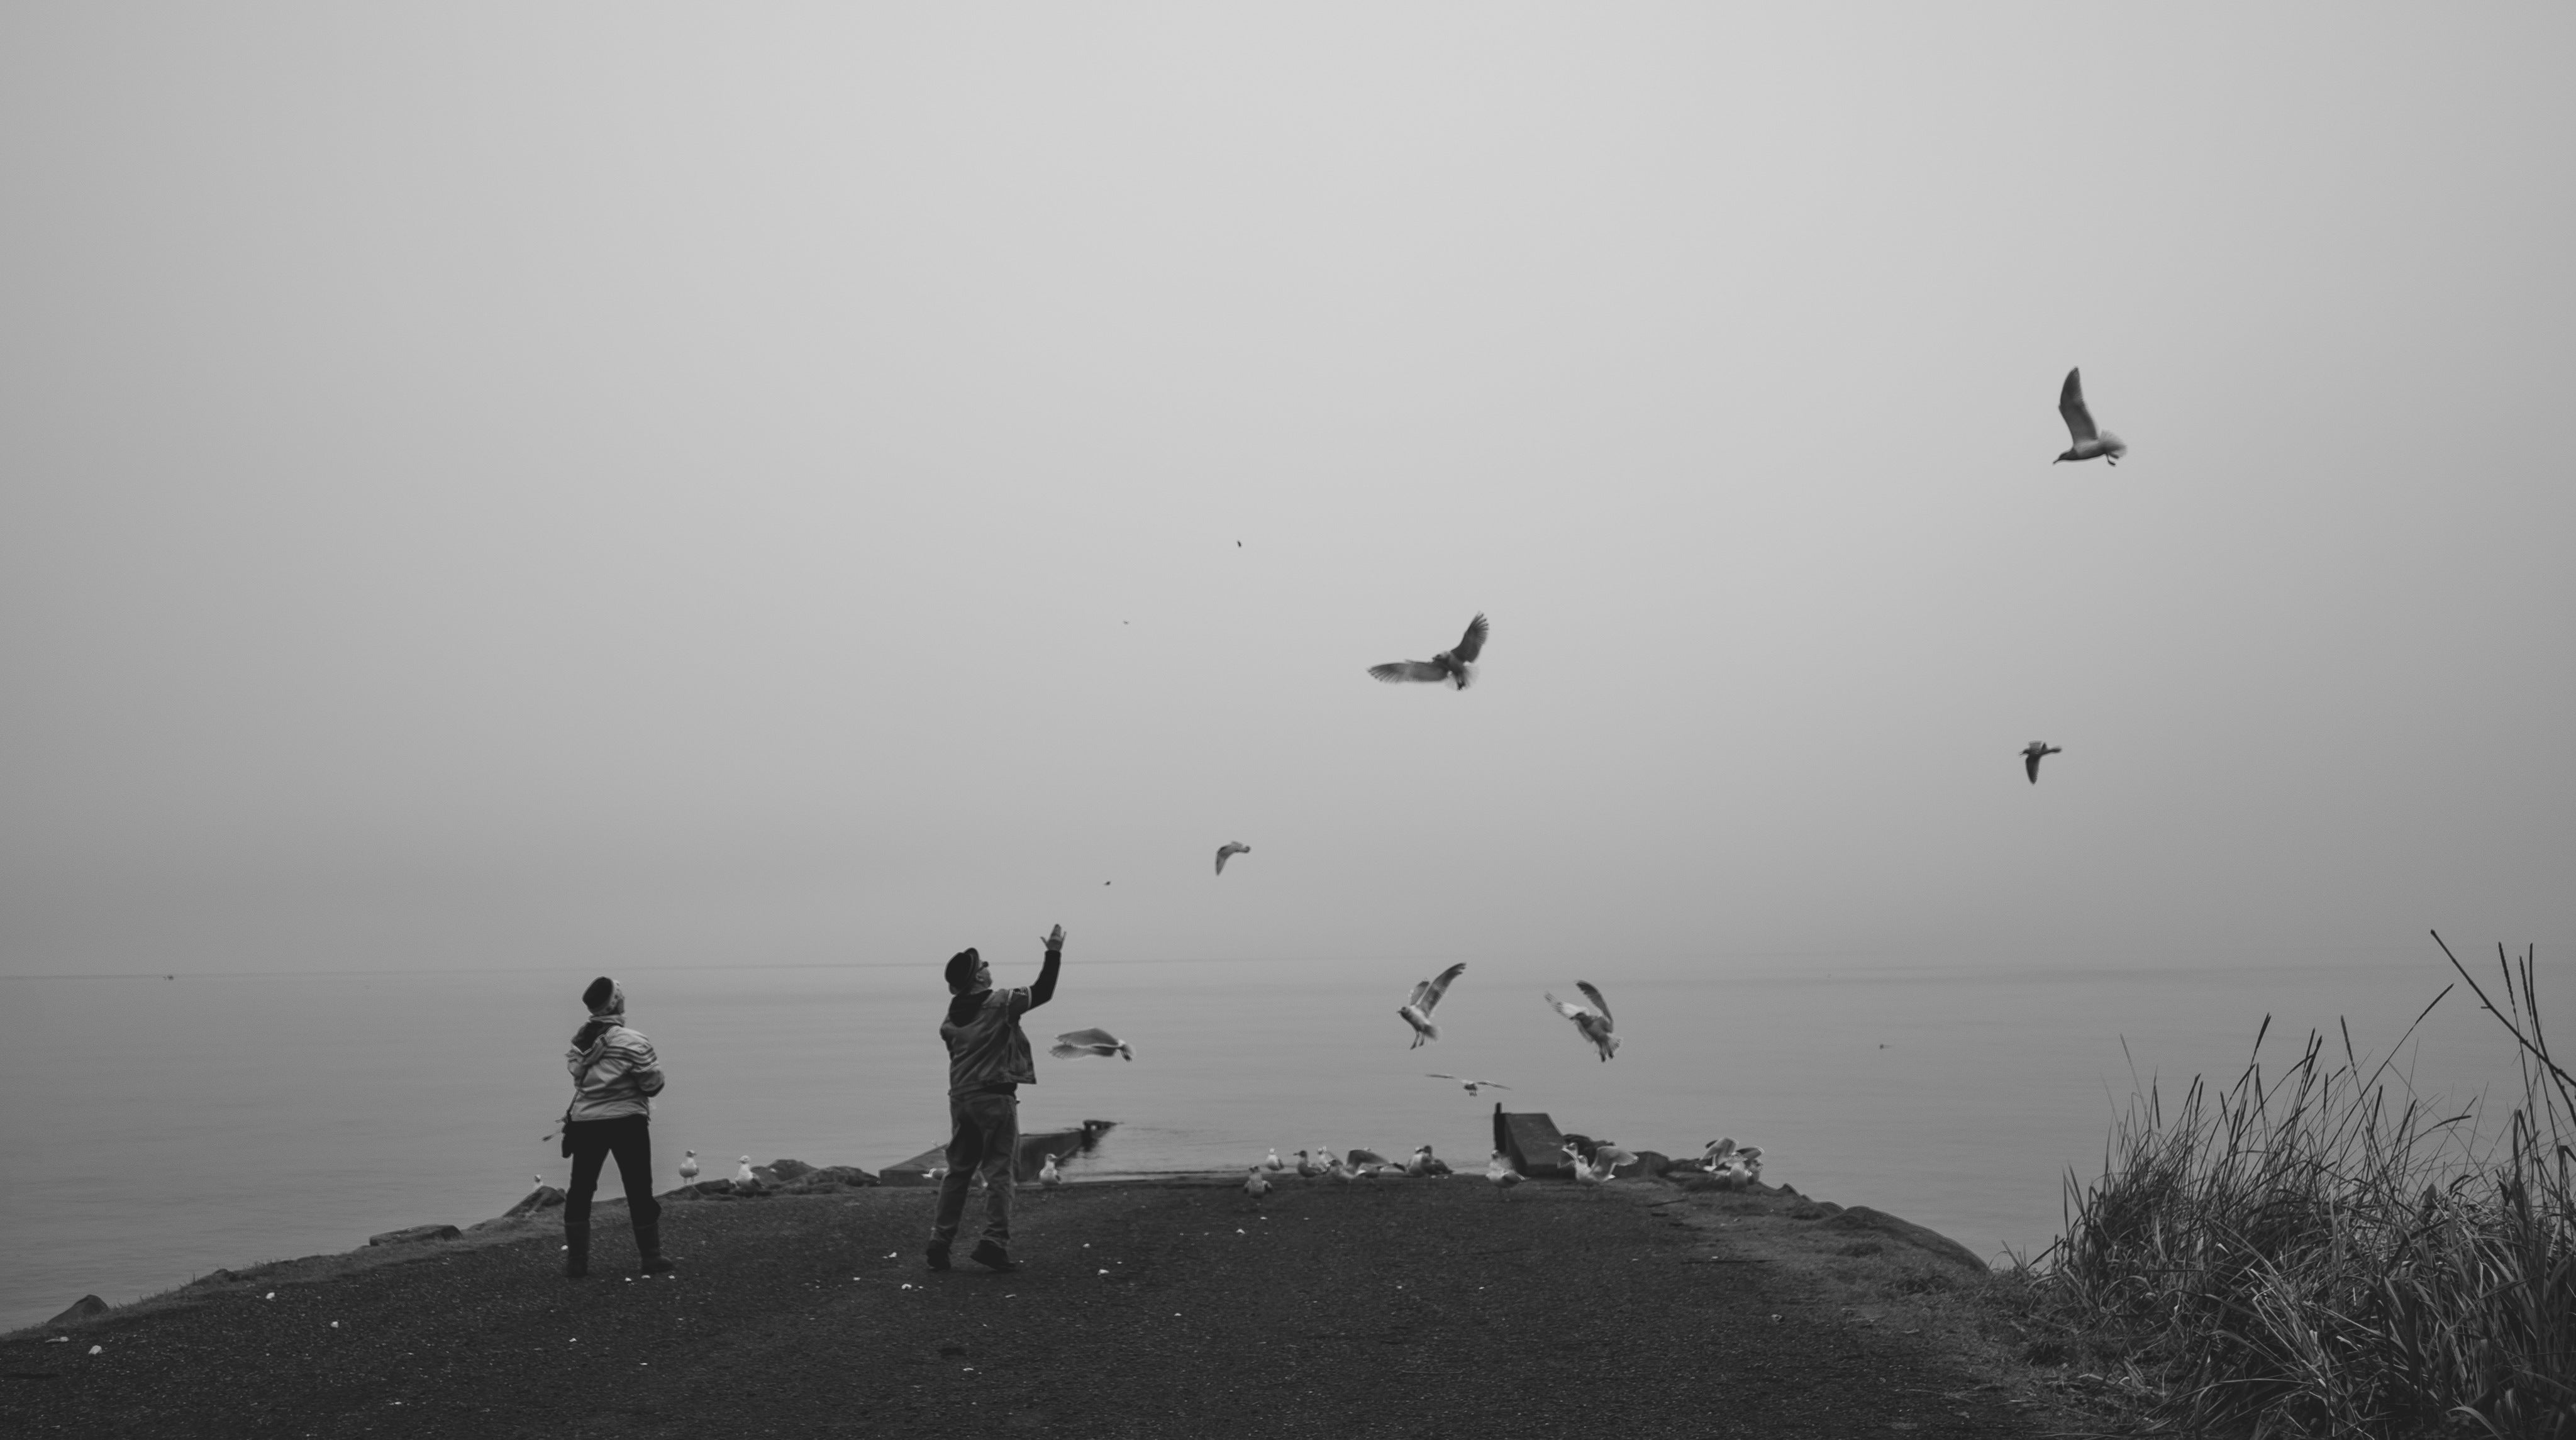 throwing-breadcrumbs-to-hungry-seagulls-circling-above.jpg